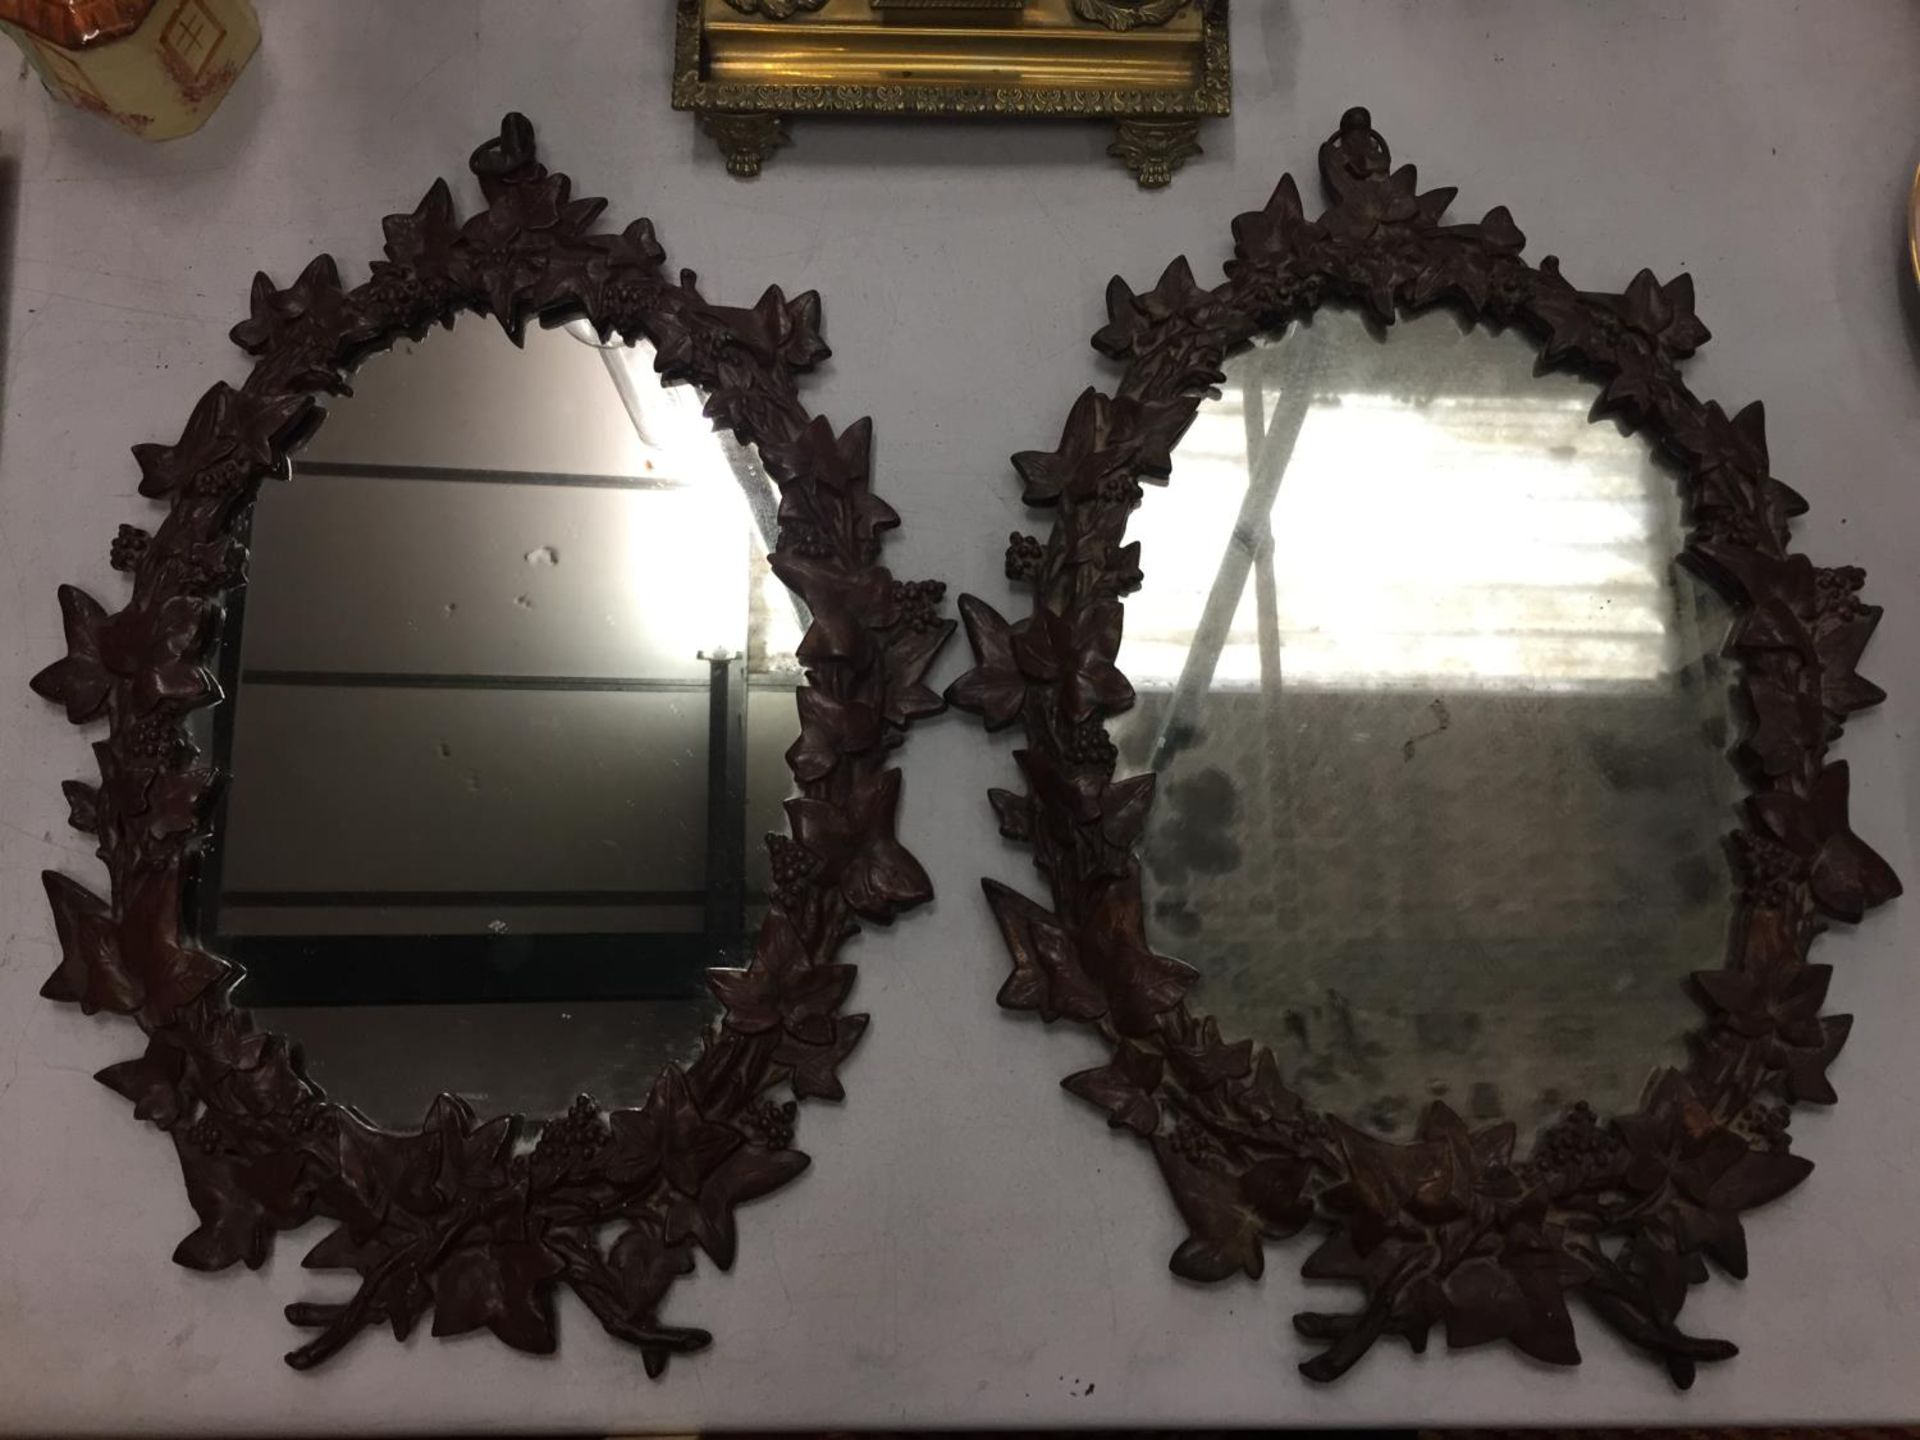 A PAIR OF HEAVY MATCHING WALL MIRRORS WITH ORNATE LEAF DESIGN